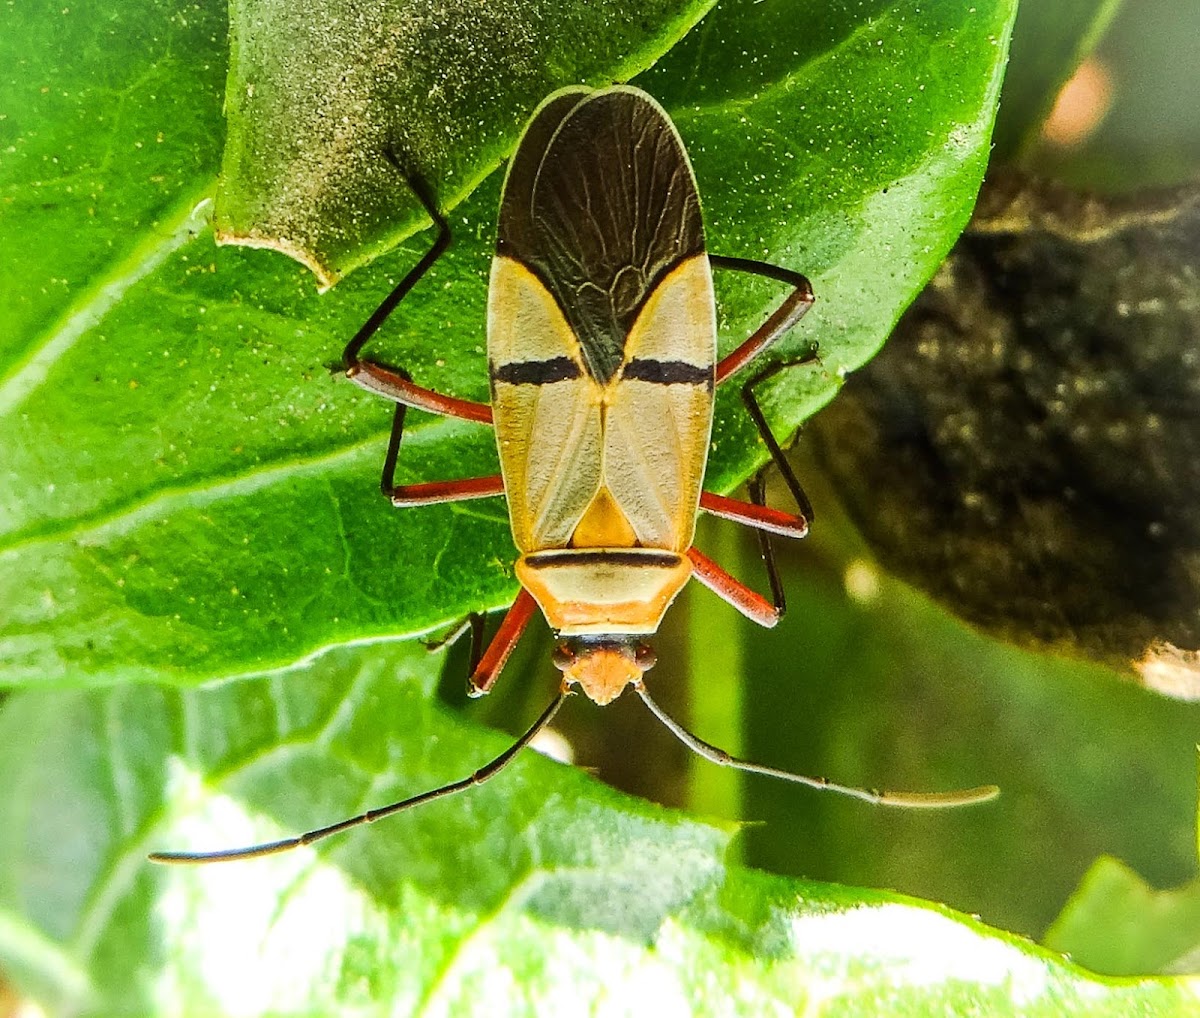 Cotton-stainer bug